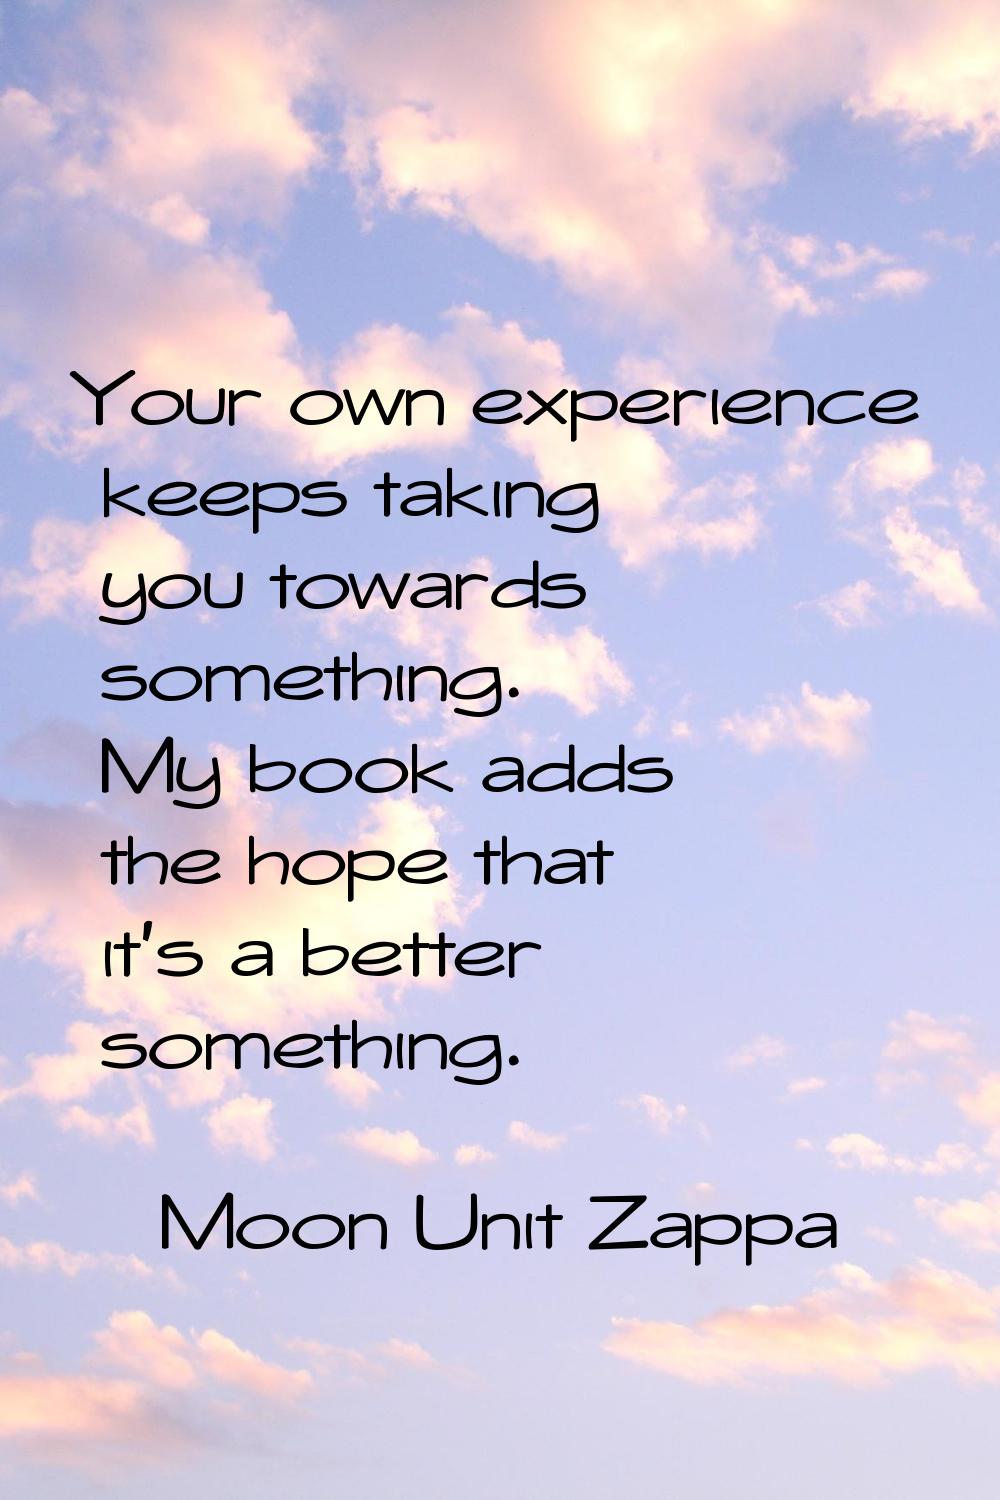 Your own experience keeps taking you towards something. My book adds the hope that it's a better so